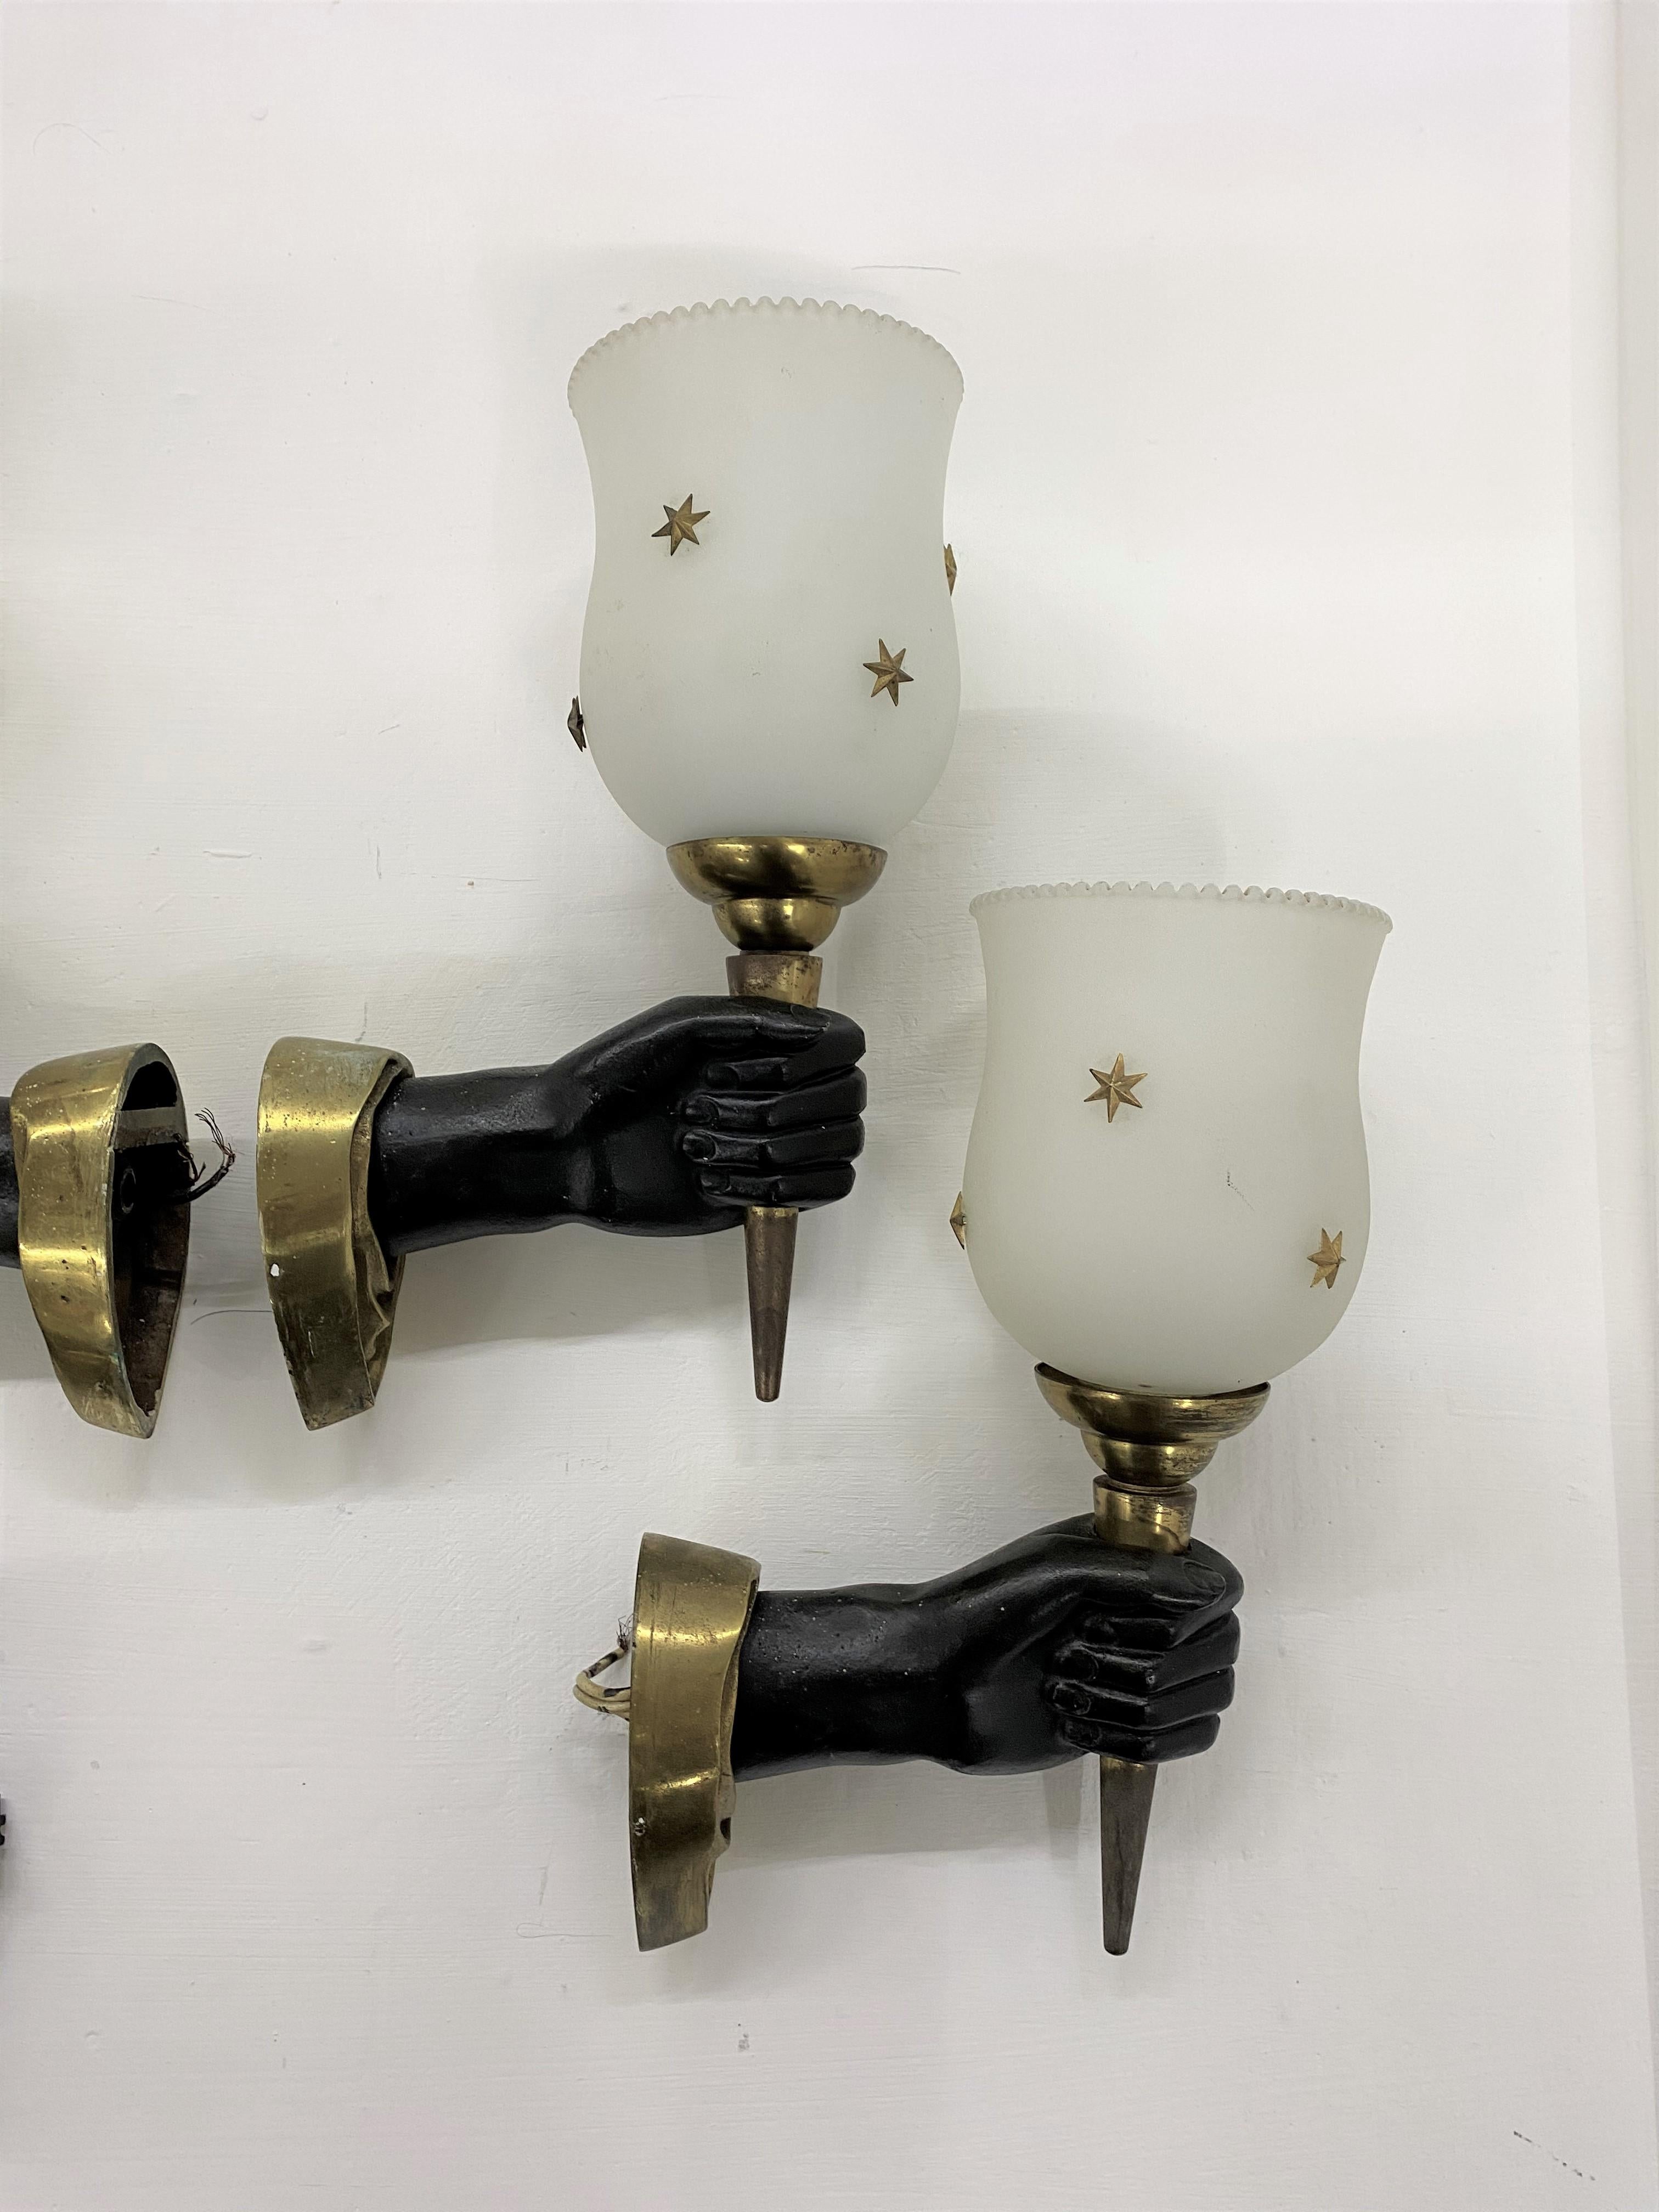 Modernist Sconces by Maison Arlus in Gilt Bronze and Opaline Glass, France In Good Condition For Sale In Merida, Yucatan